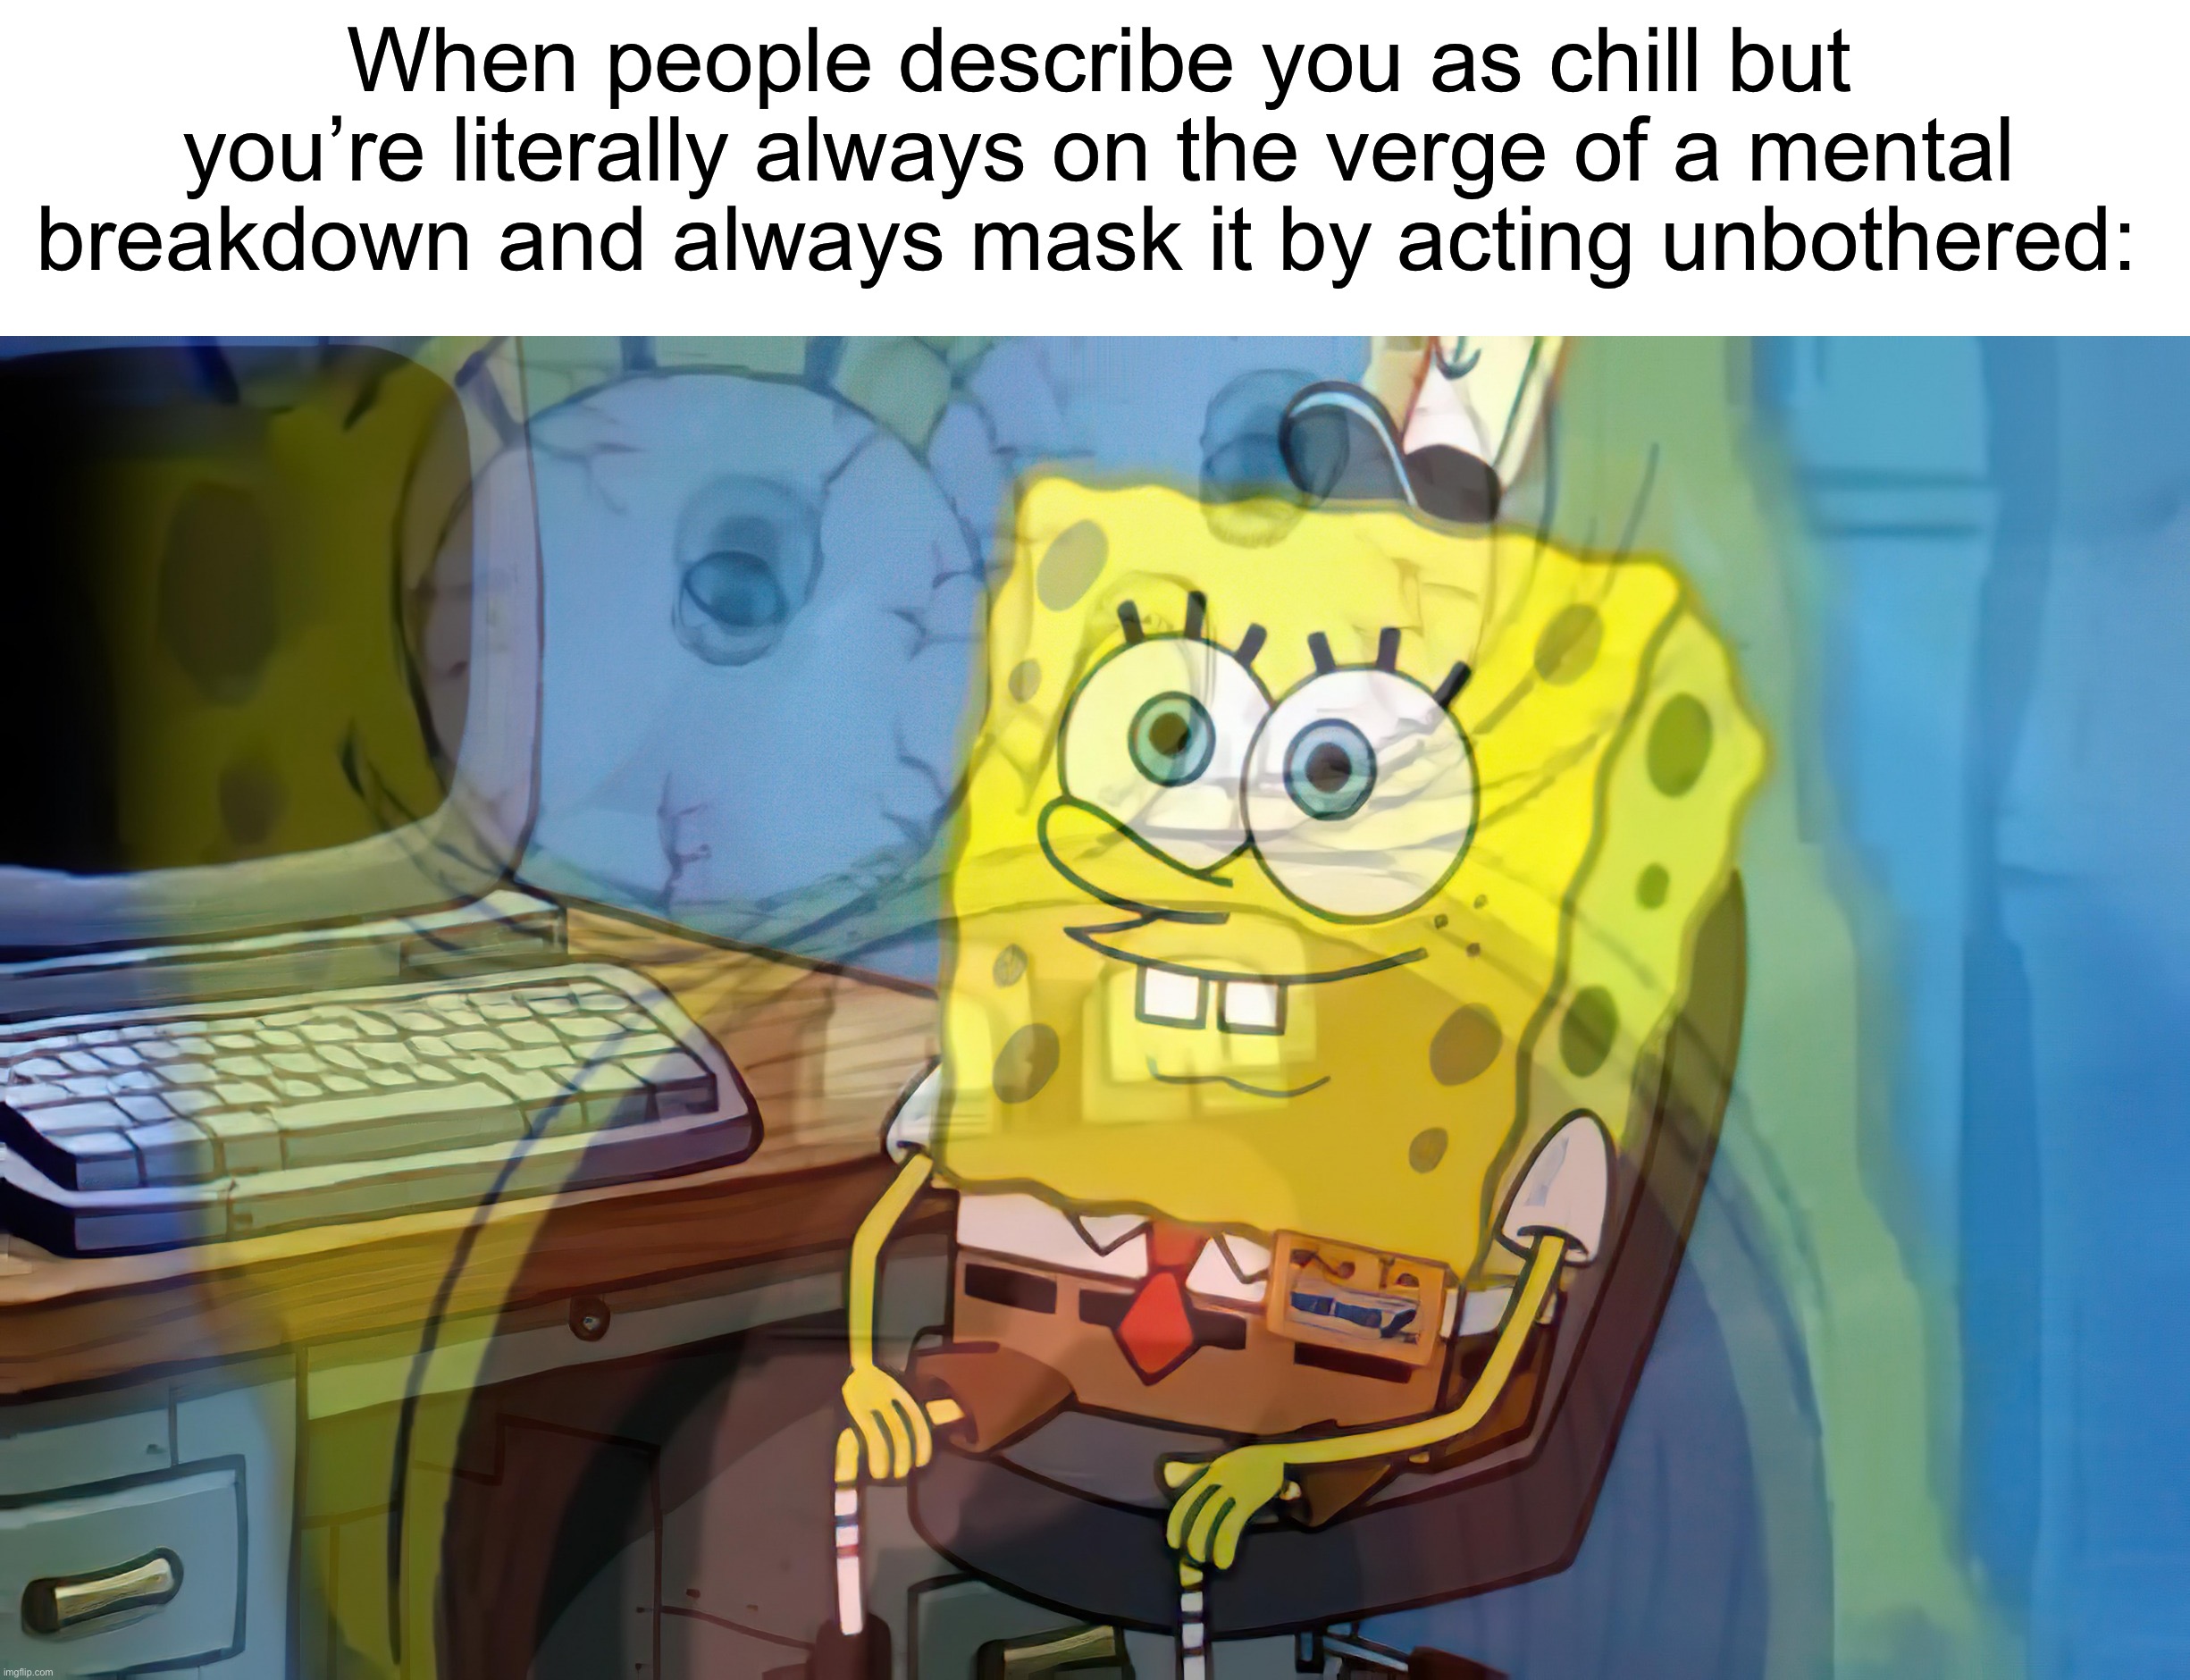 Accurate ngl | When people describe you as chill but you’re literally always on the verge of a mental breakdown and always mask it by acting unbothered: | image tagged in spongebob internal screaming,memes,funny,true story,relatable memes,school | made w/ Imgflip meme maker